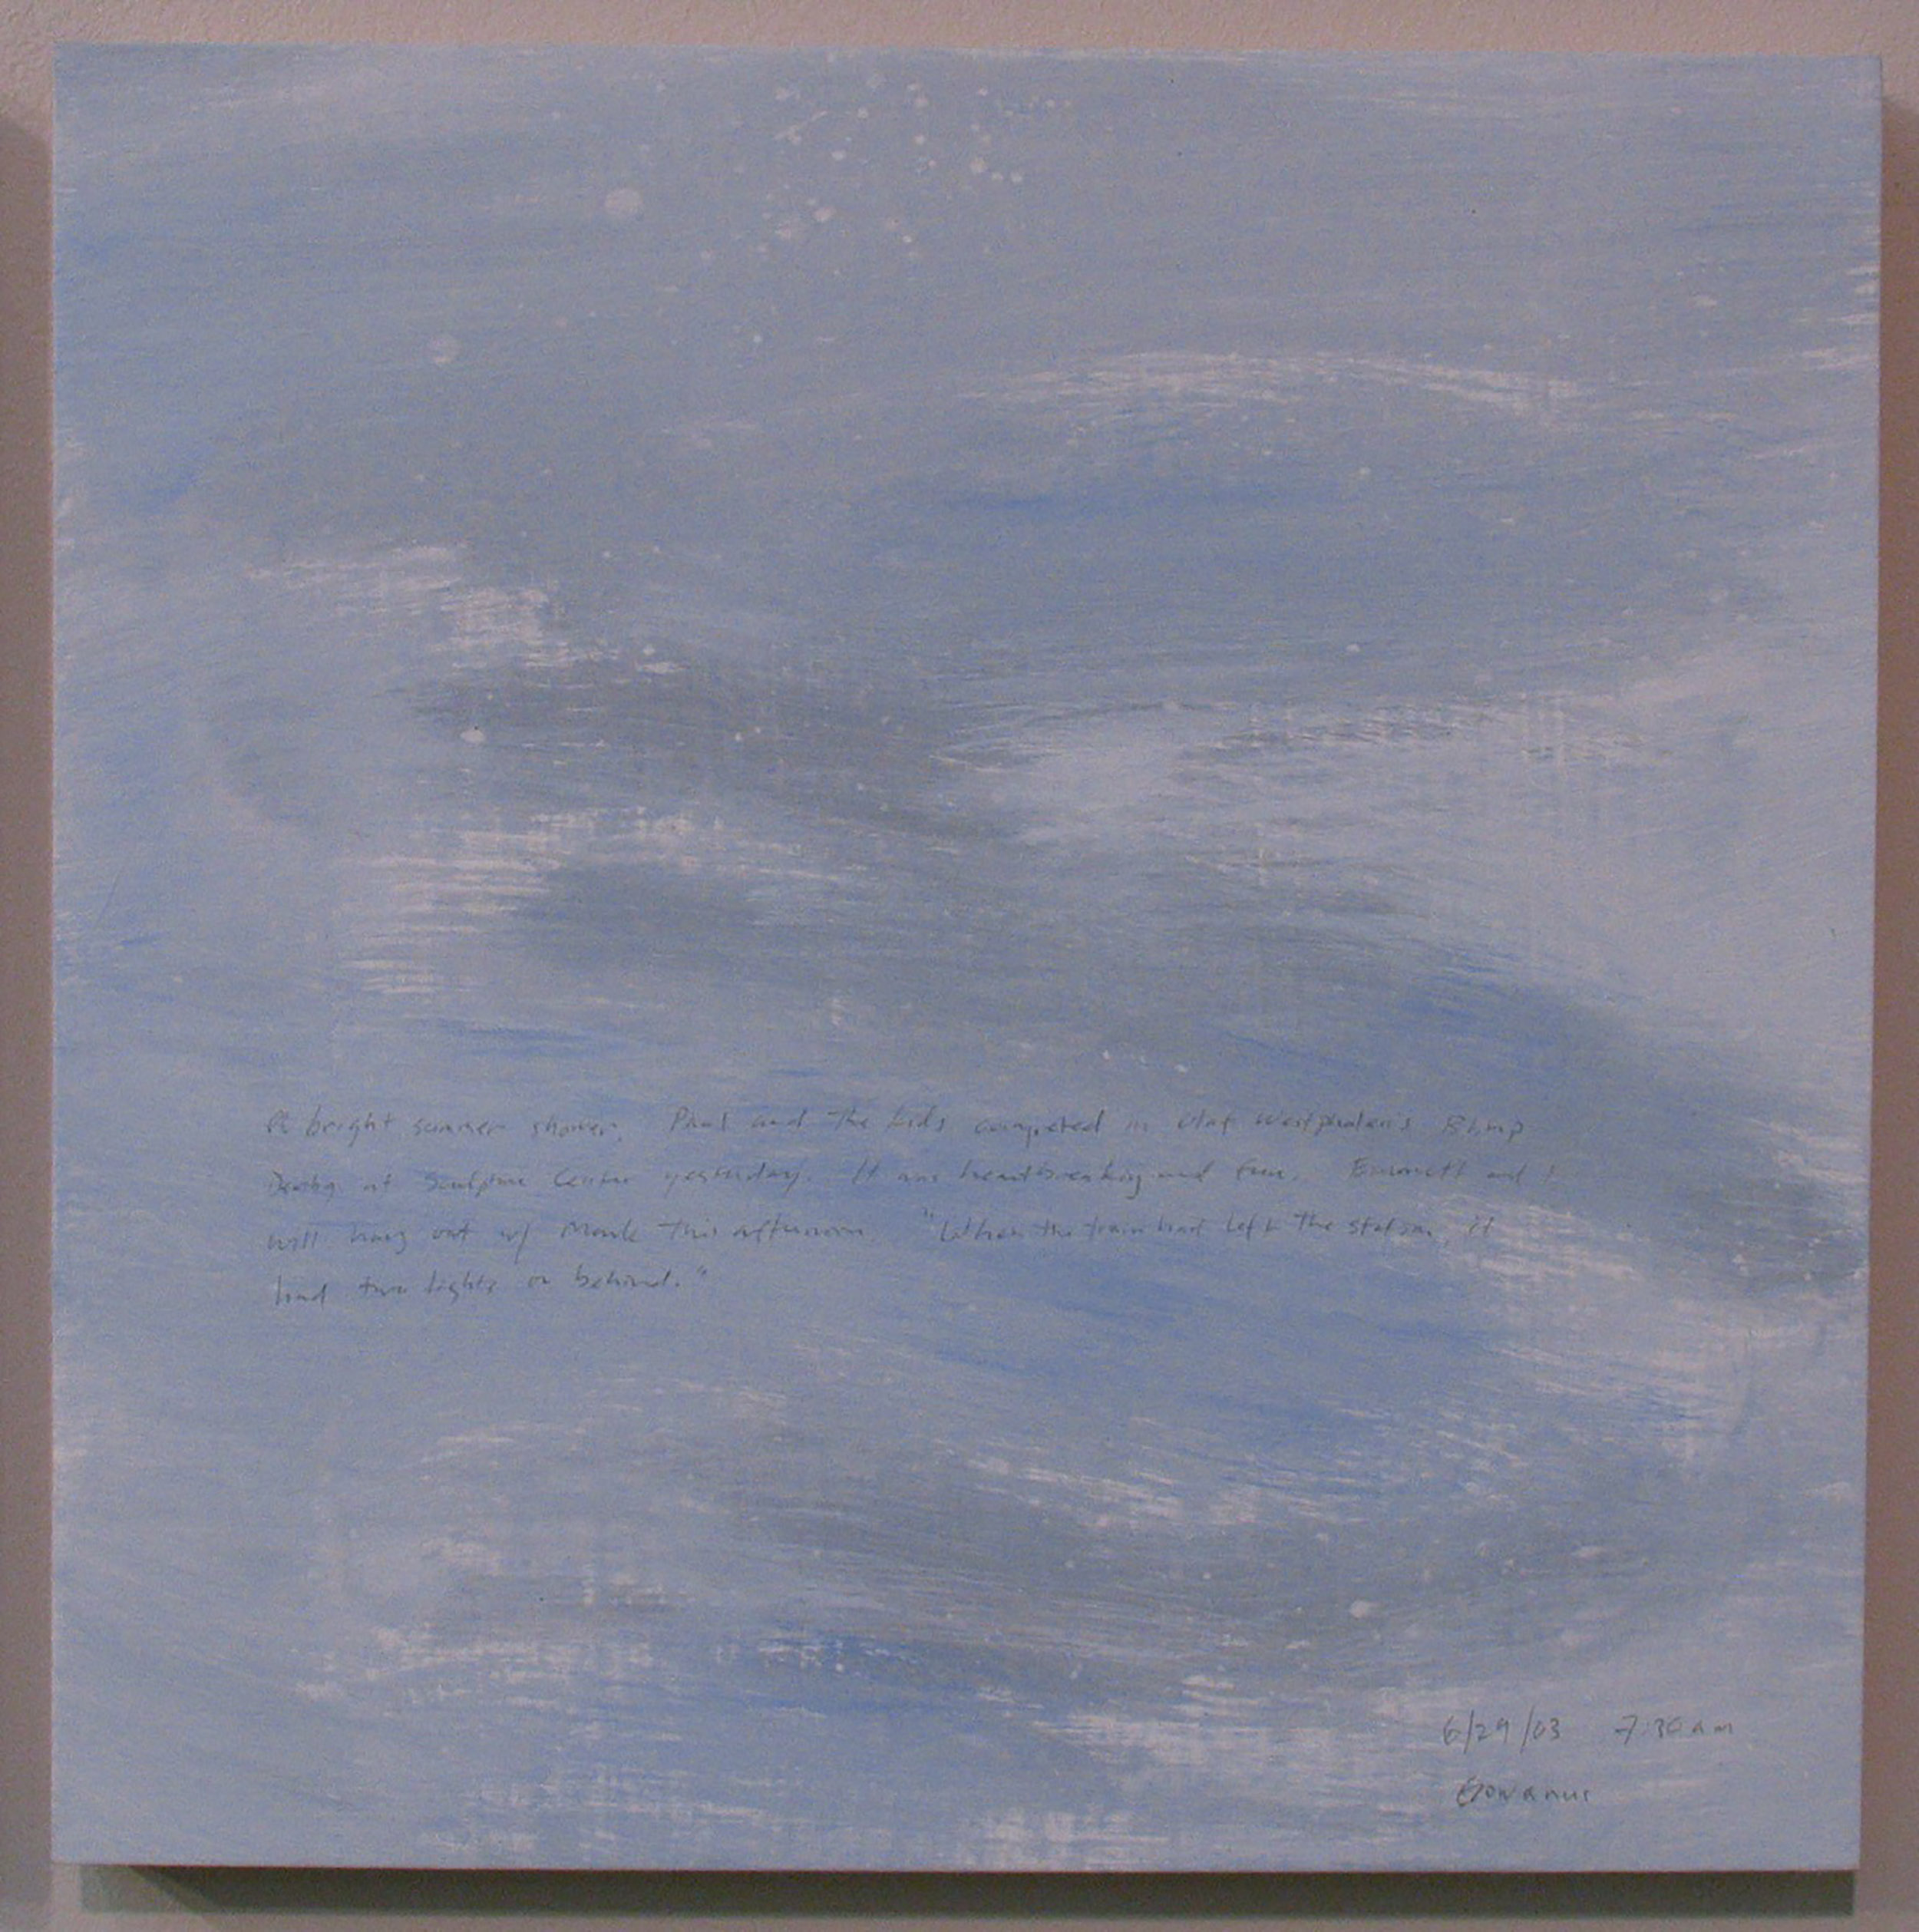 A 14 × 14 inch, acrylic painting of the sky. A journal entry is handwritten on the painting:

“A bright summer shower. Paul and the kids competed in Olaf Westphalen’s Blimp Derby at Sculpture Center yesterday. It was heartbreaking and fun. Emmett and I will hang out w/ Mark this afternoon. “When the train had left the station. It had two lights on behind.”  

6/29/03 7:30 am
Gowanus”